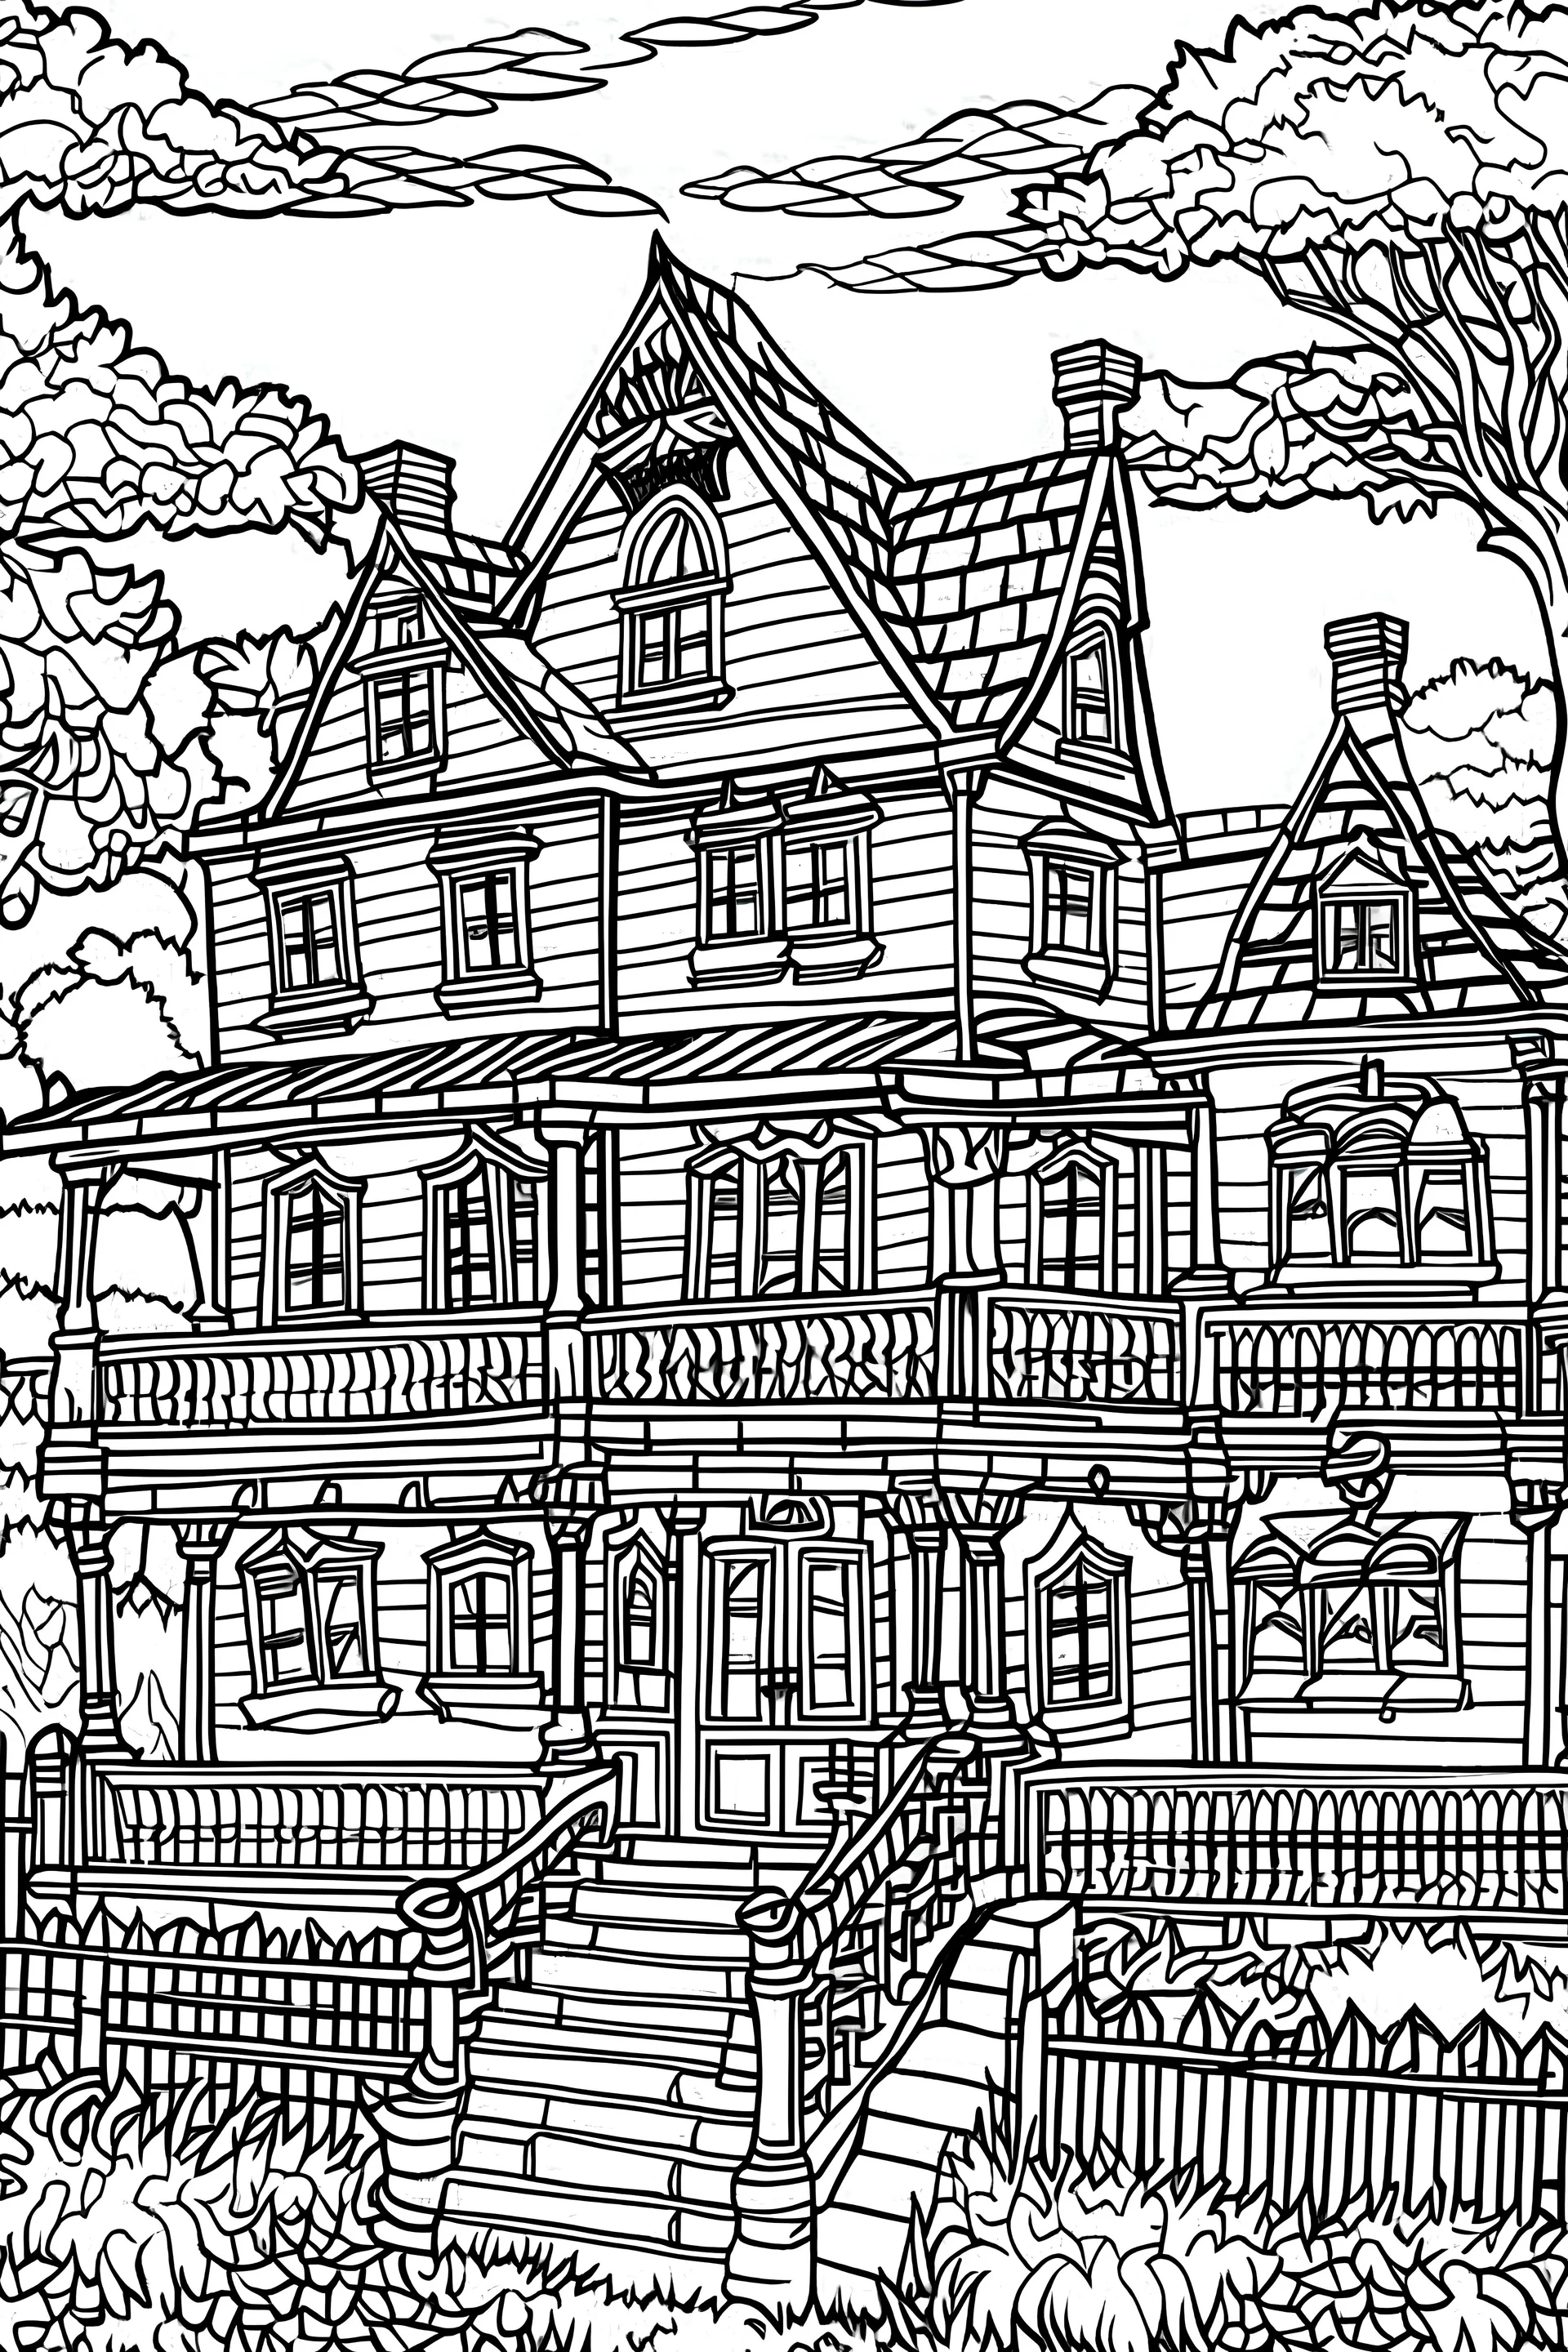 outline art black like a coloring book, haunted house halloween